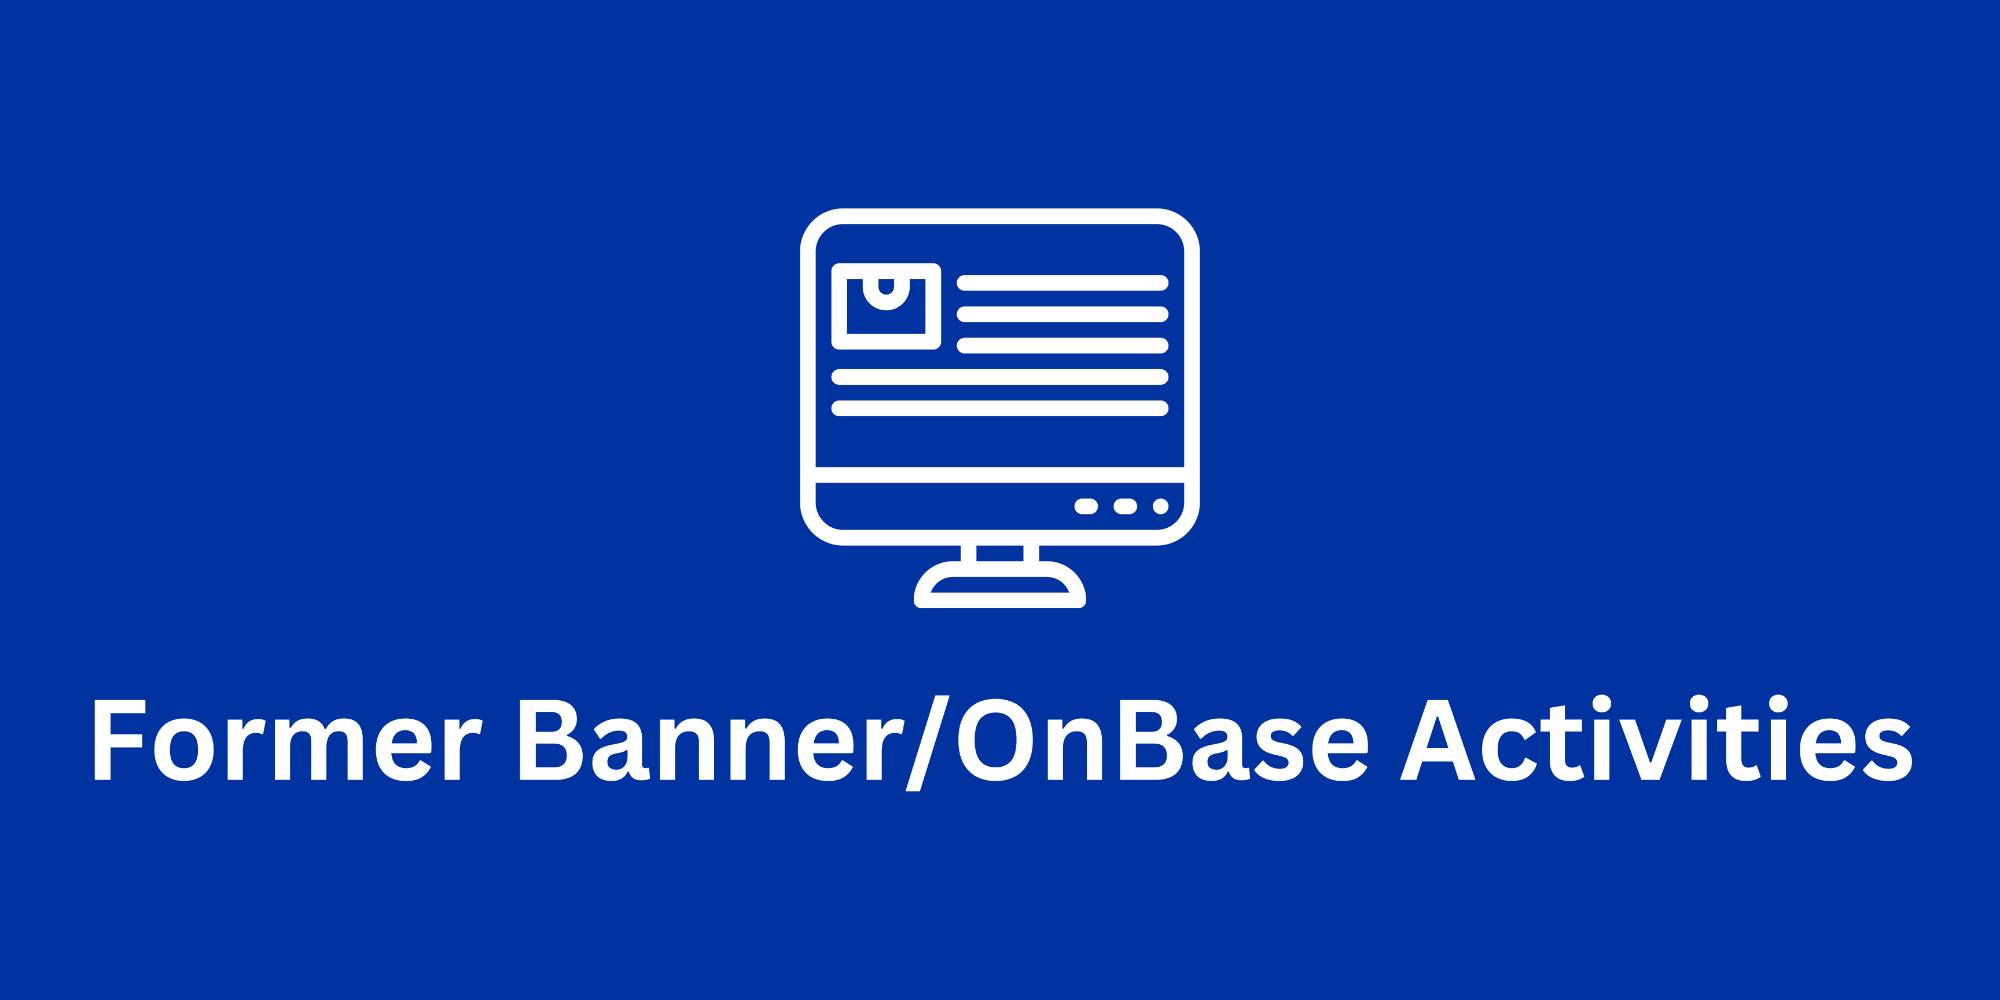 Former Banner/OnBase Activities